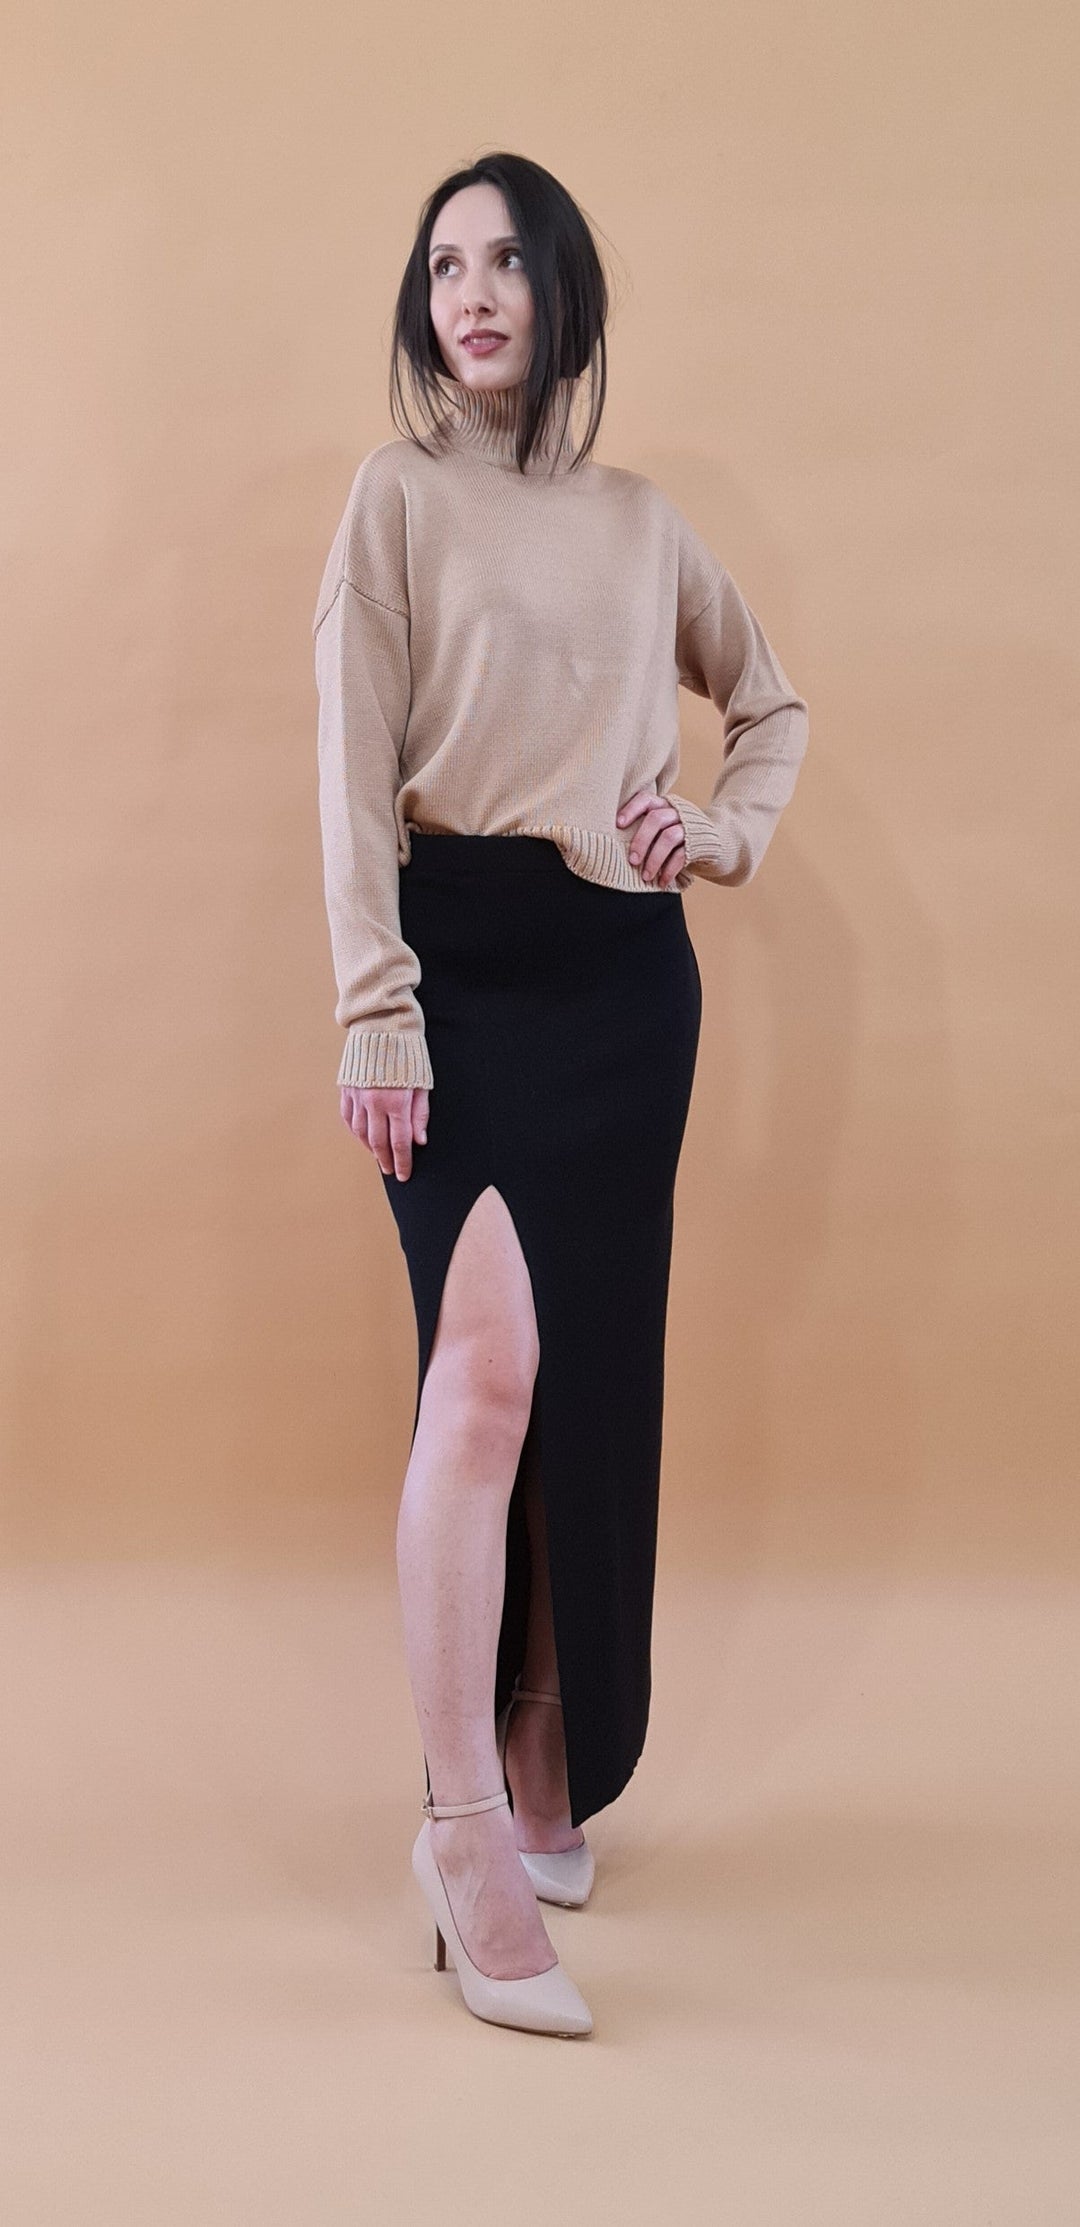 Woman wearing a beige turtleneck sweater and black skirt with a high slit, standing in front of a beige background